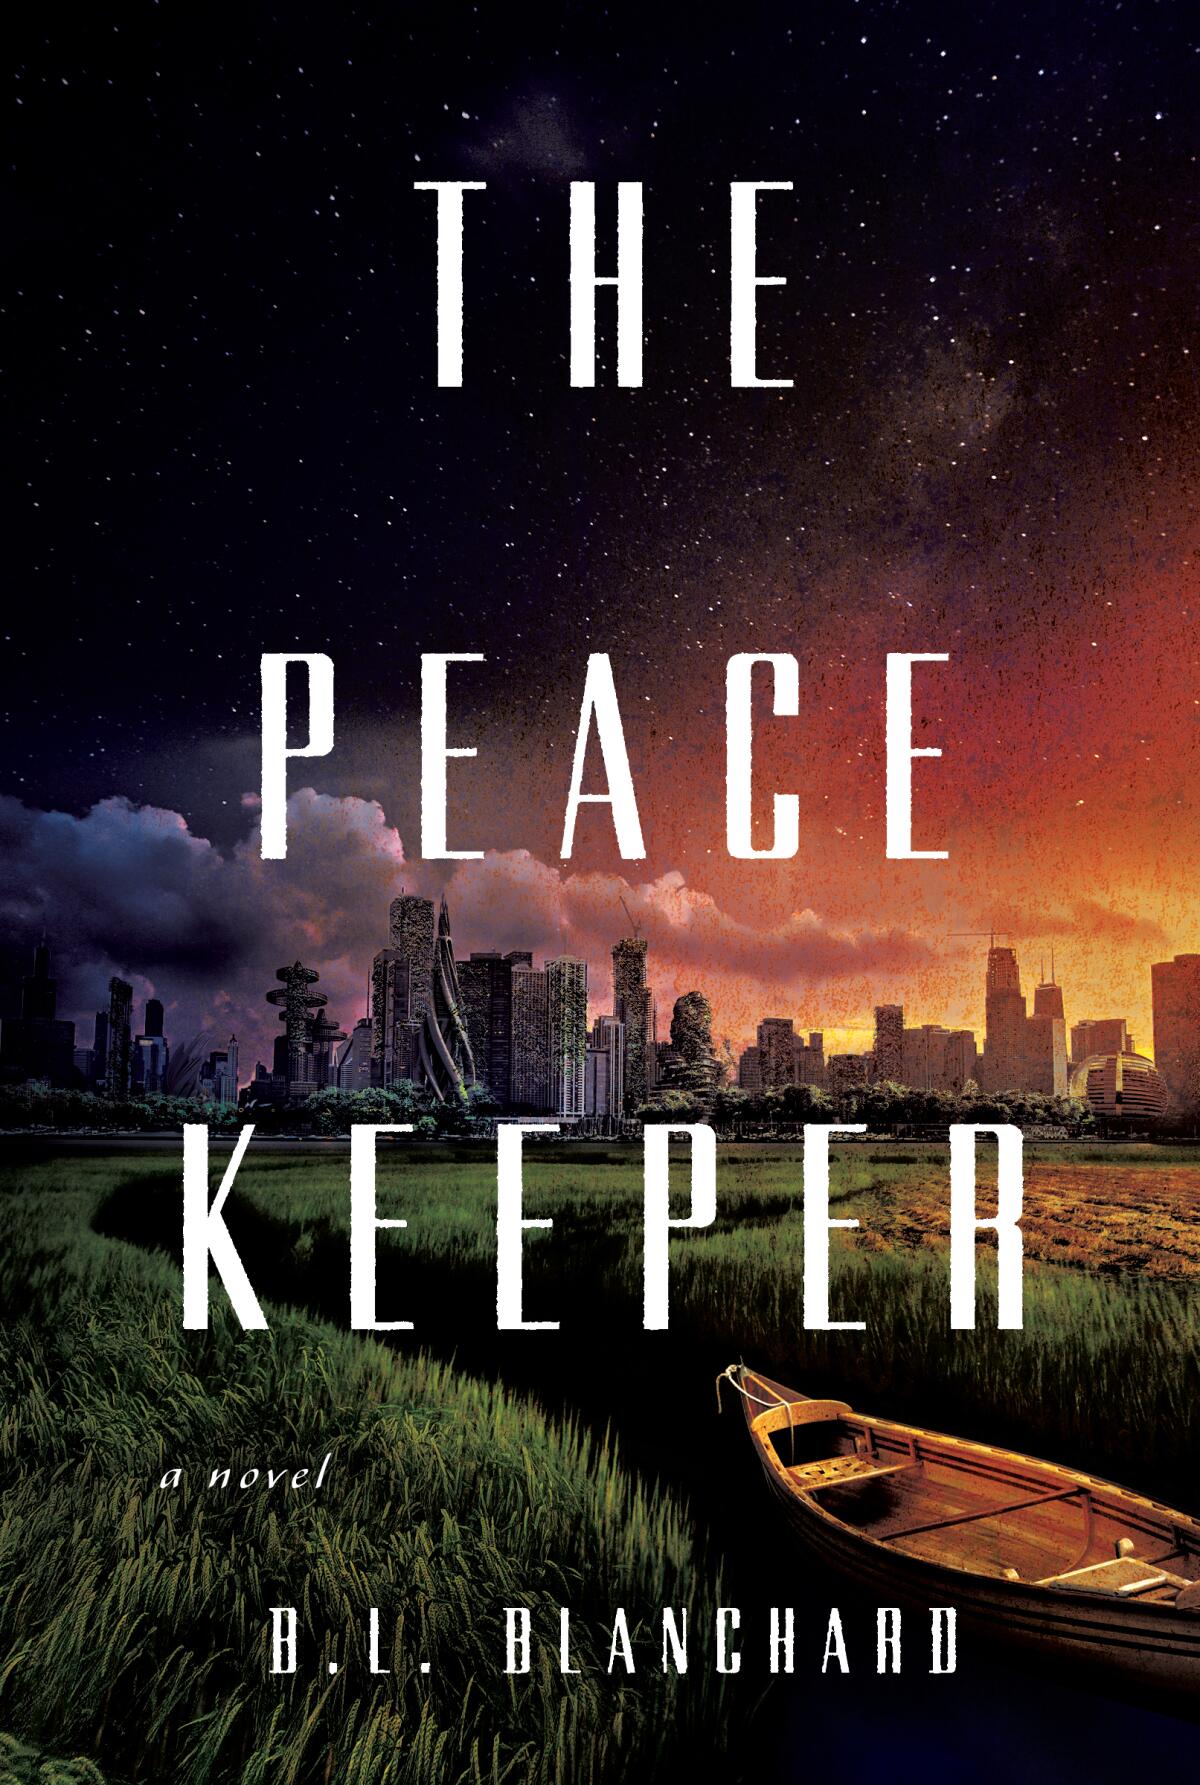 "The Peacekeeper" by B.L. Blanchard